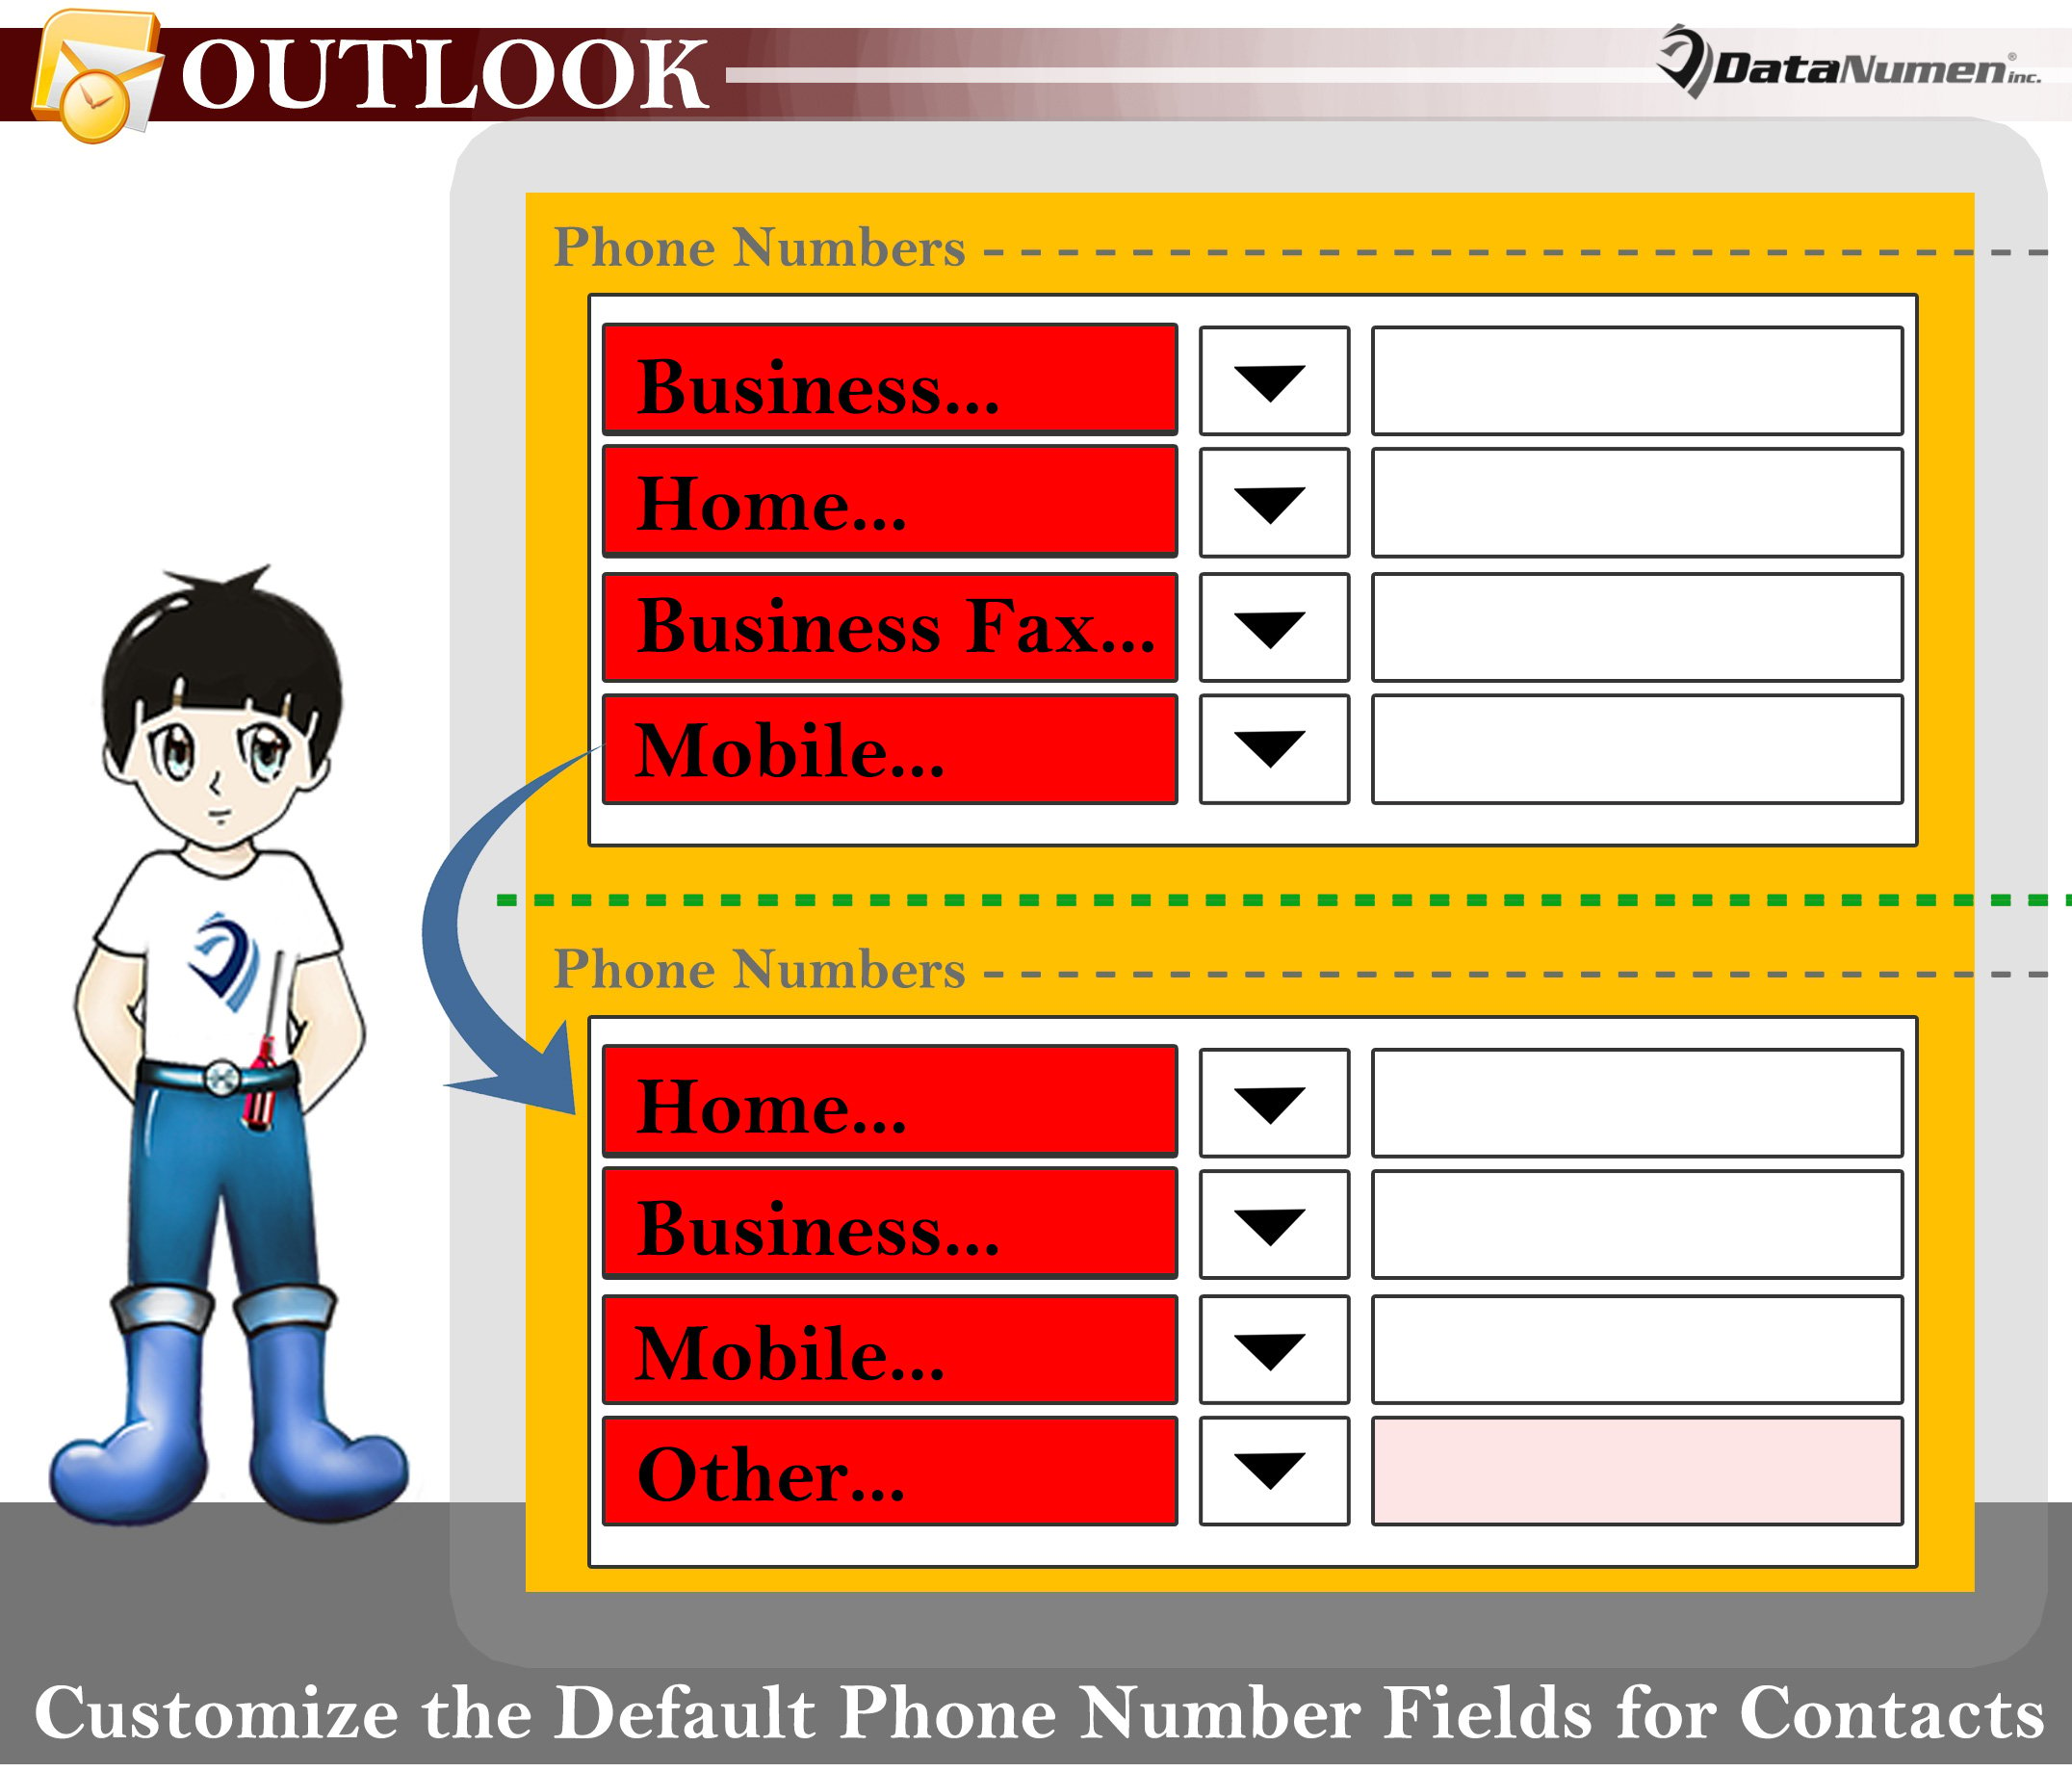 Quickly Customize the Default Phone Number Fields for Outlook Contacts